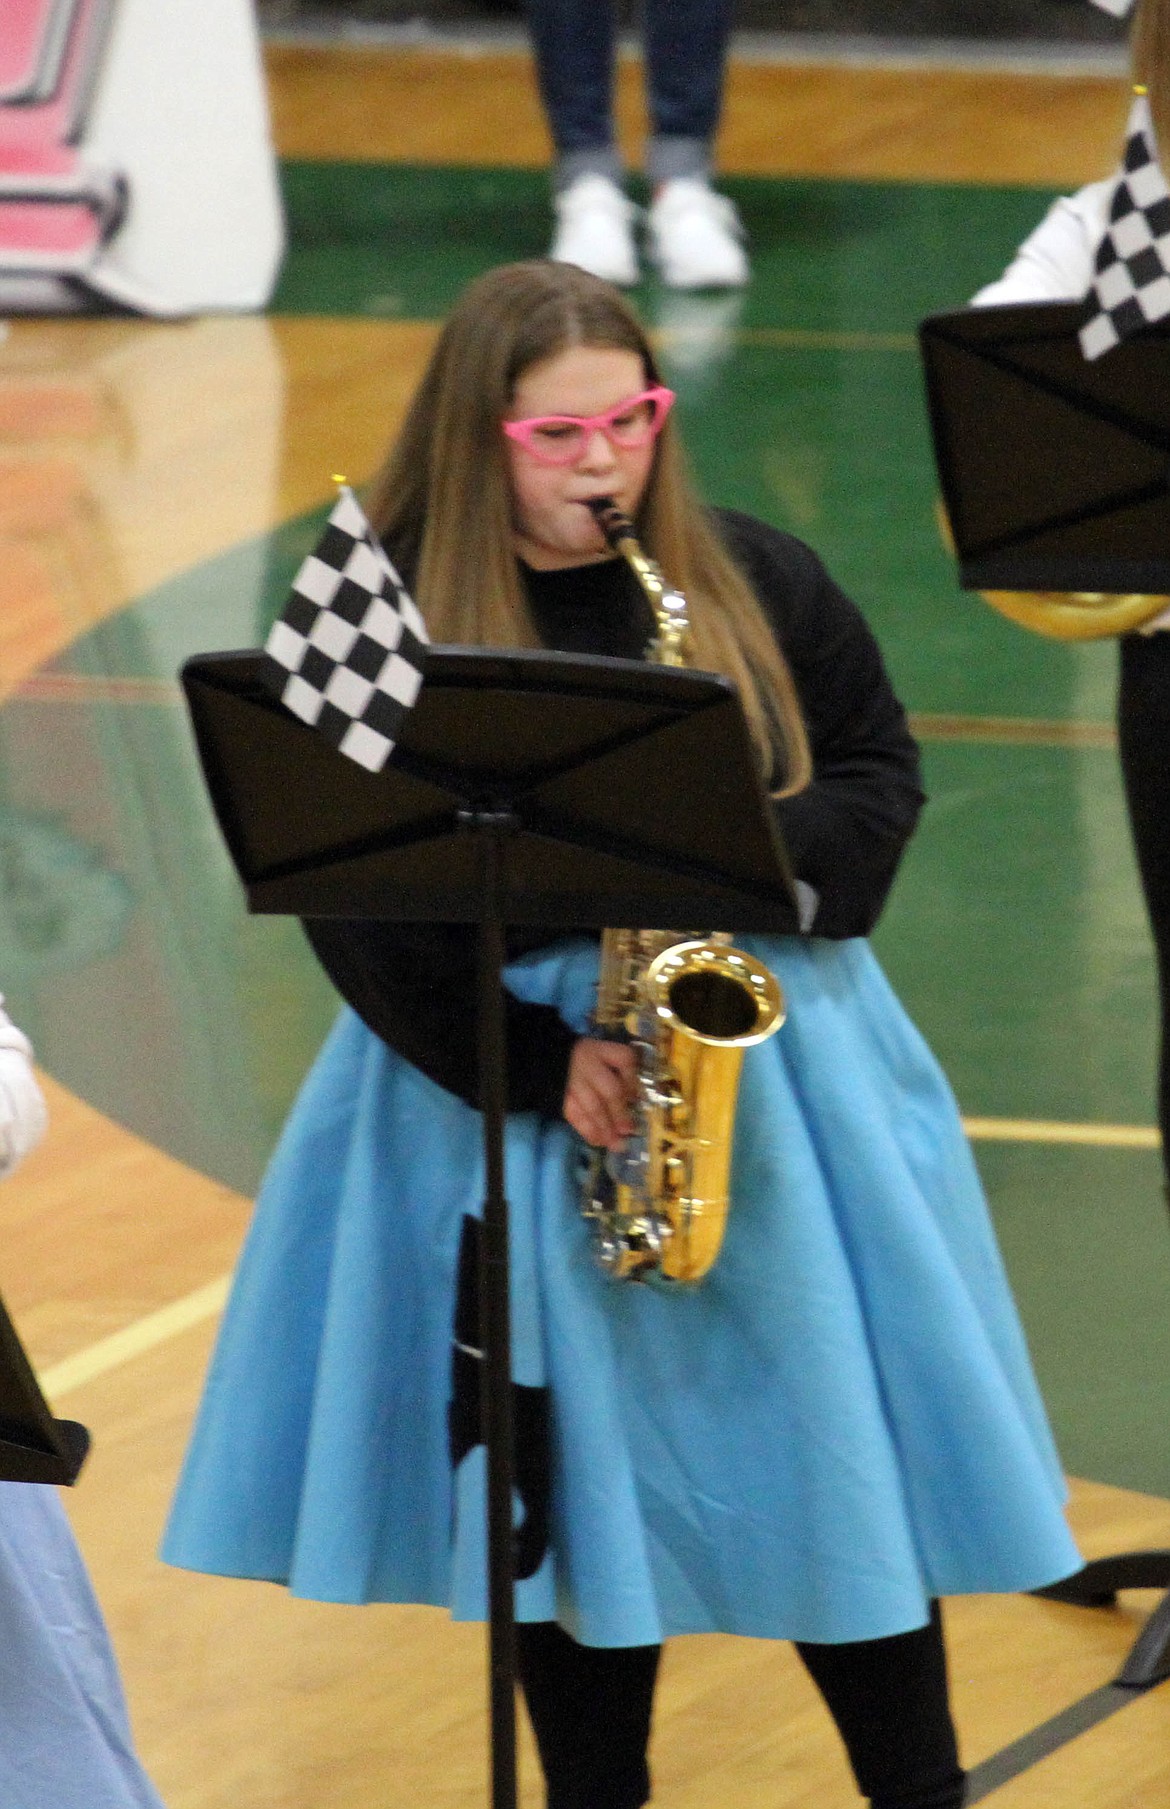 Photo by JOSH MCDONALD
Ashlynn Forsberg in her 50&#146;s attire during the battle of the bands competition.